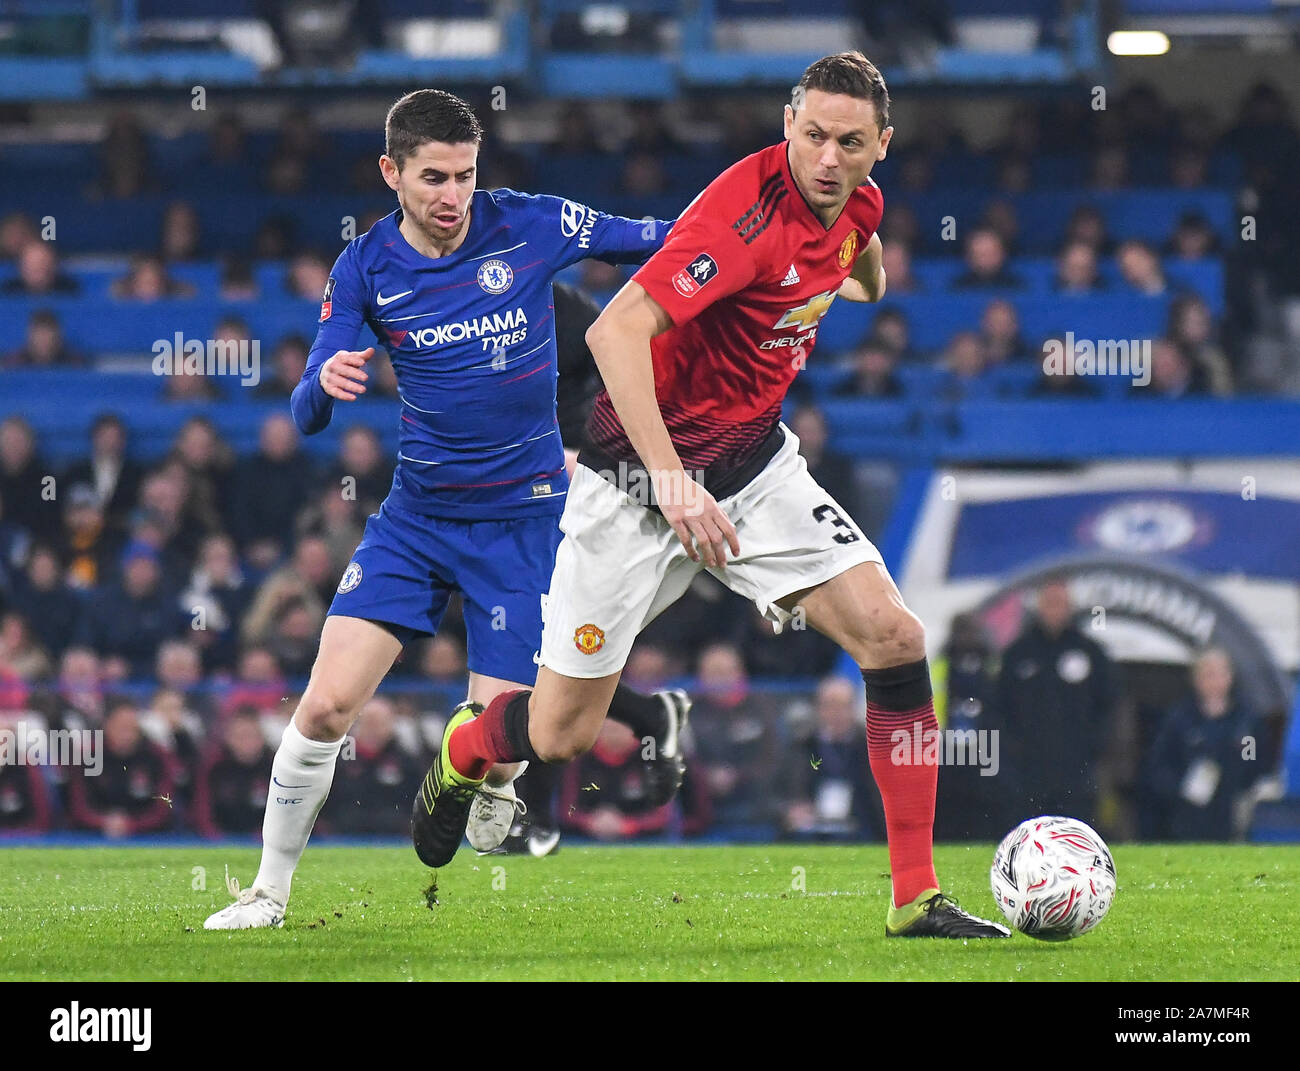 LONDON, ENGLAND - FEBRUARY 18, 2019: Jorge Luiz Frello Filho (Jorginho) of Chelsea and Nemanja Matic of Manchester pictured during the 2018/19 FA Cup Fifth Round game between Chelsea FC and Manchester United at Stamford Bridge. Stock Photo